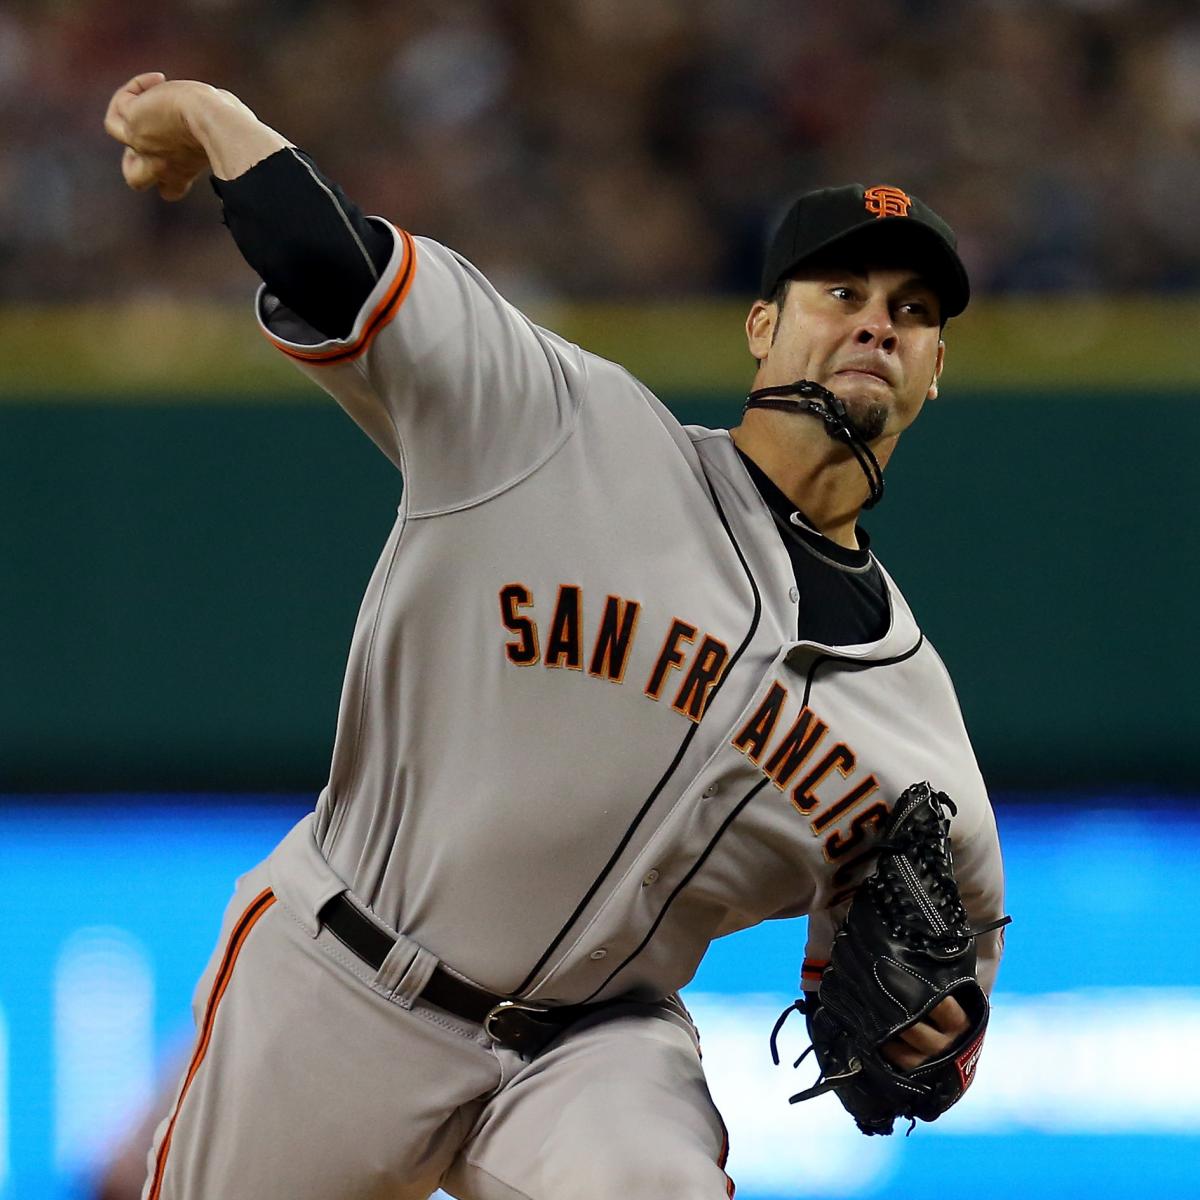 Key SF Giants pitcher getting ready to sign?